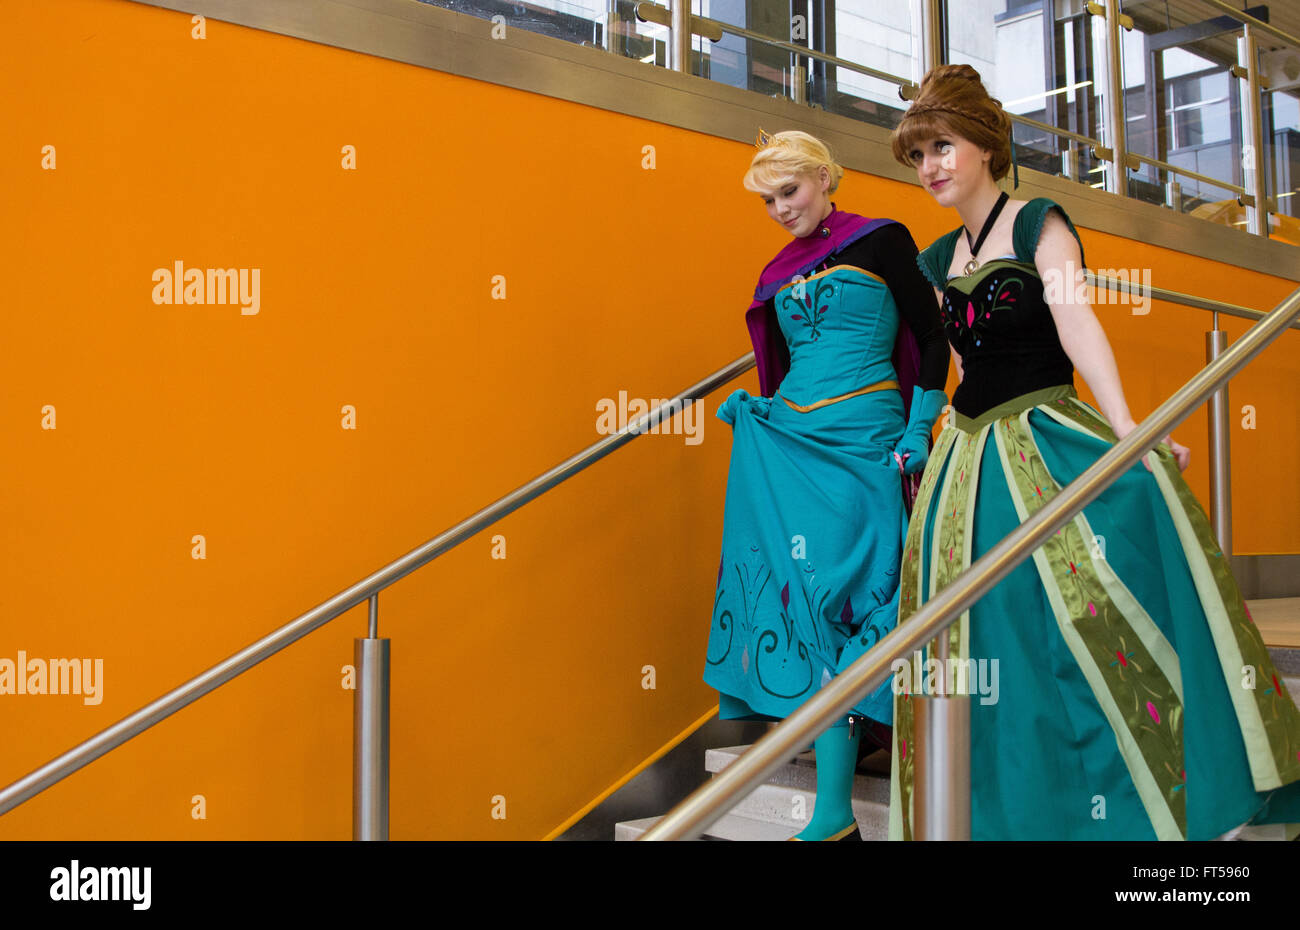 Elsa and Ana from 'Frozen' walking down stairs Stock Photo